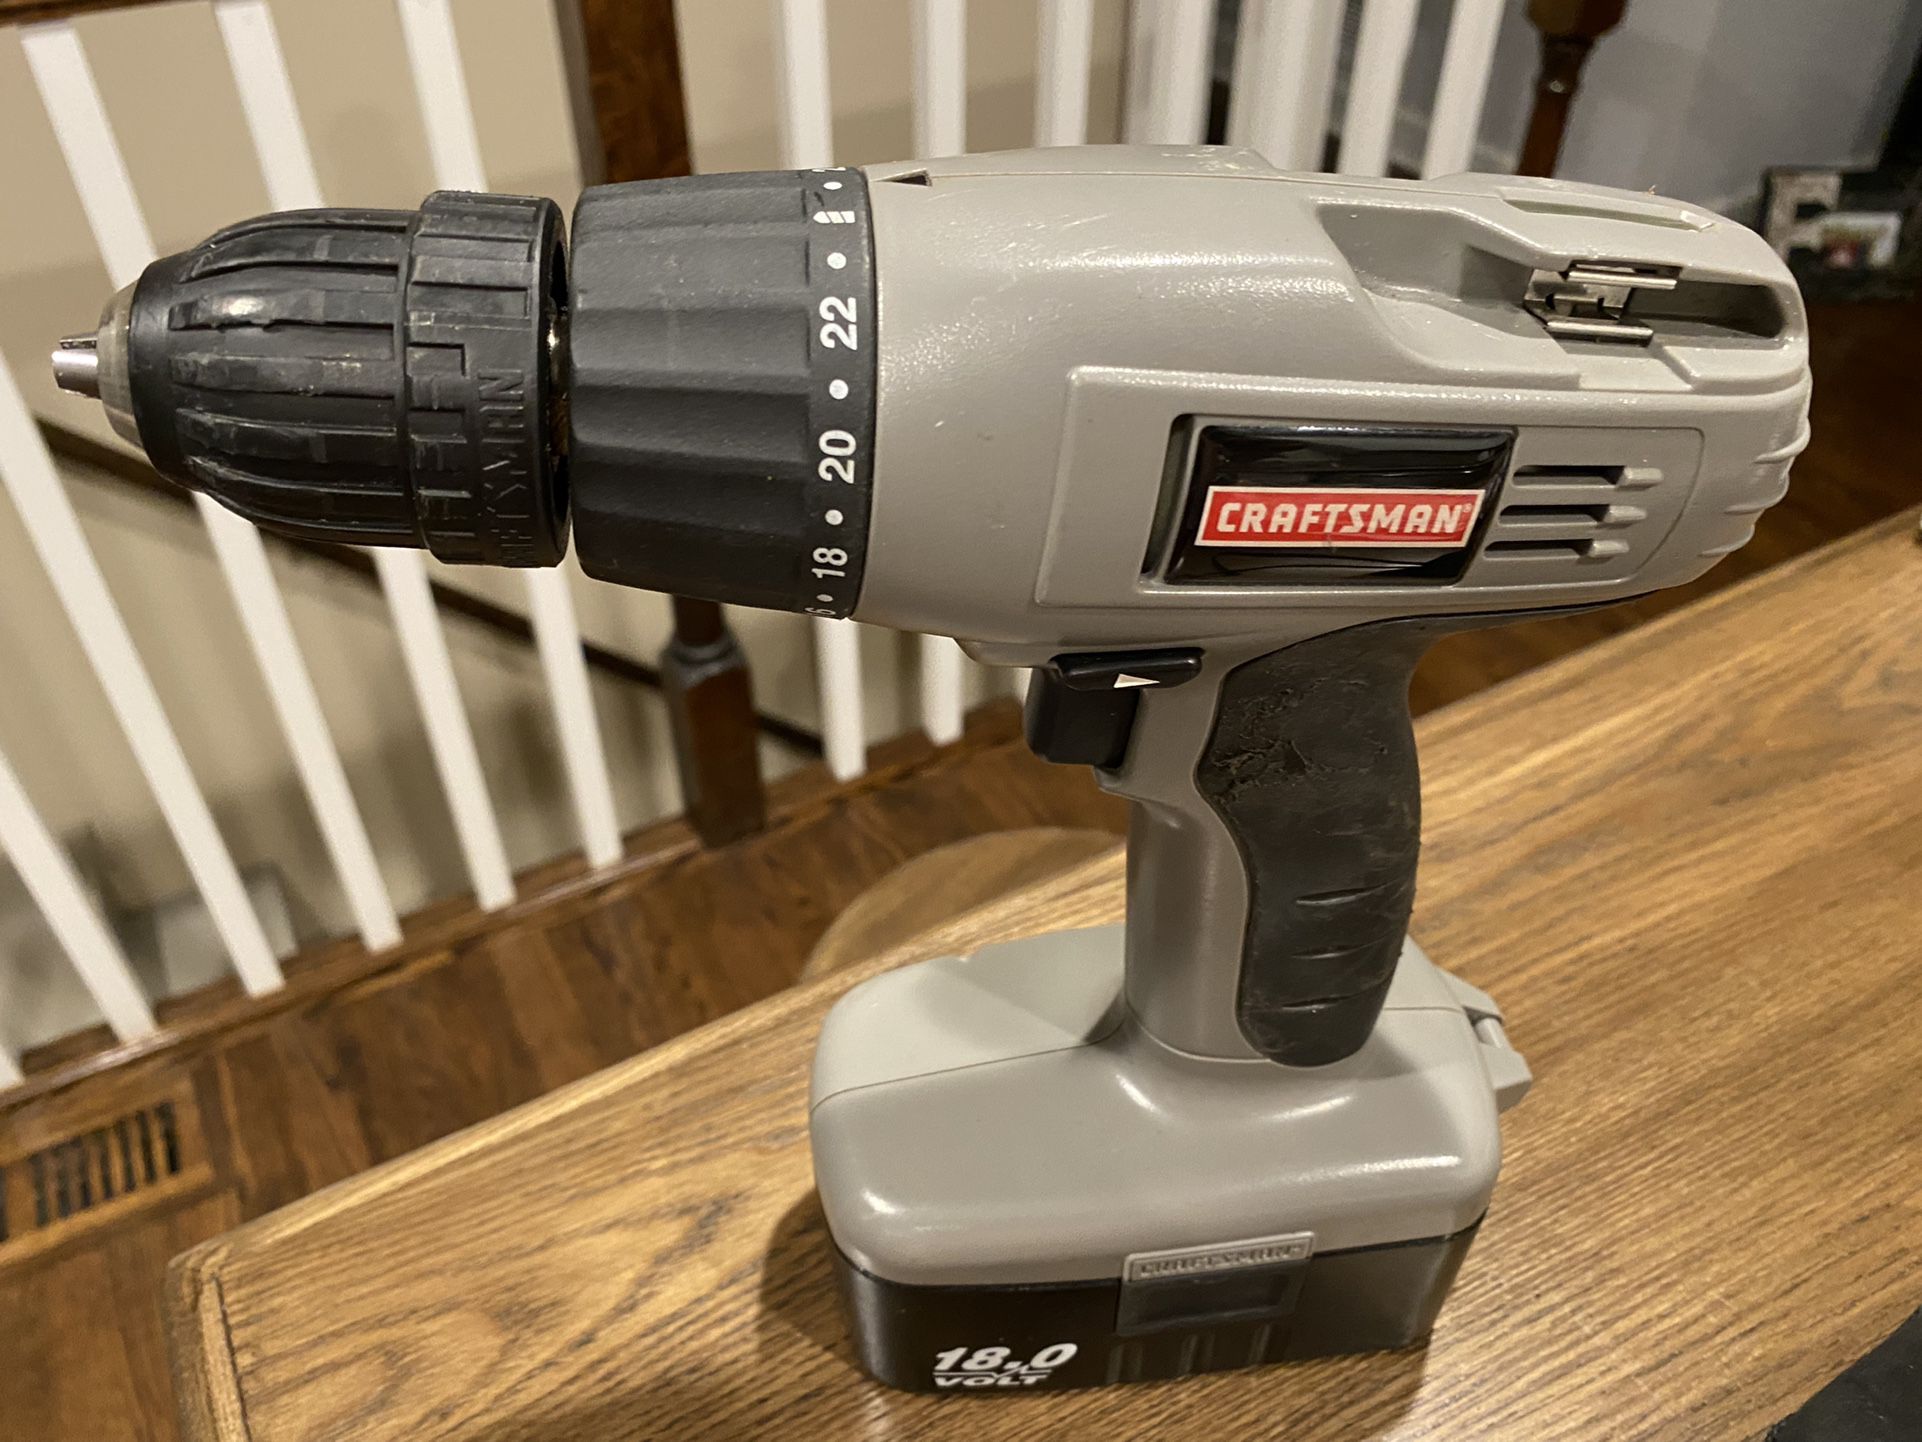 Craftsman cordless rechargeable Drill